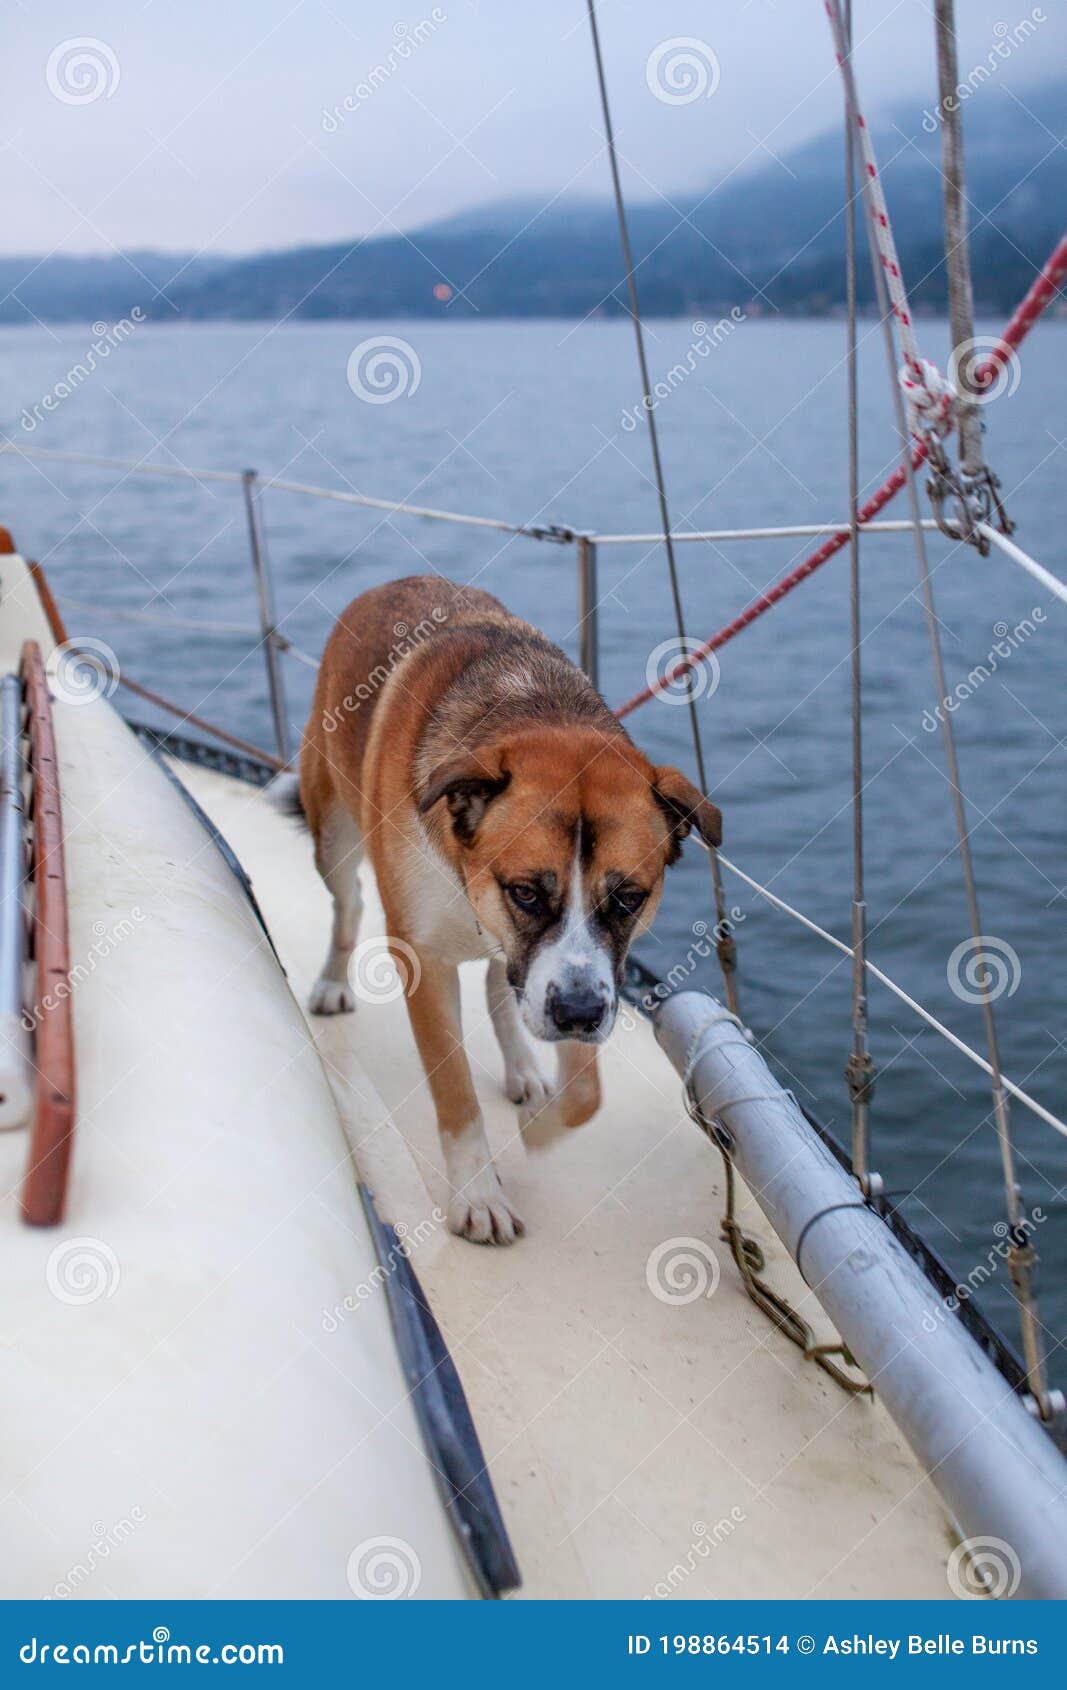 A Husky St Mix Dog Walks on the of a Sailboat Stock Photo - Image of sailing, transport: 198864514